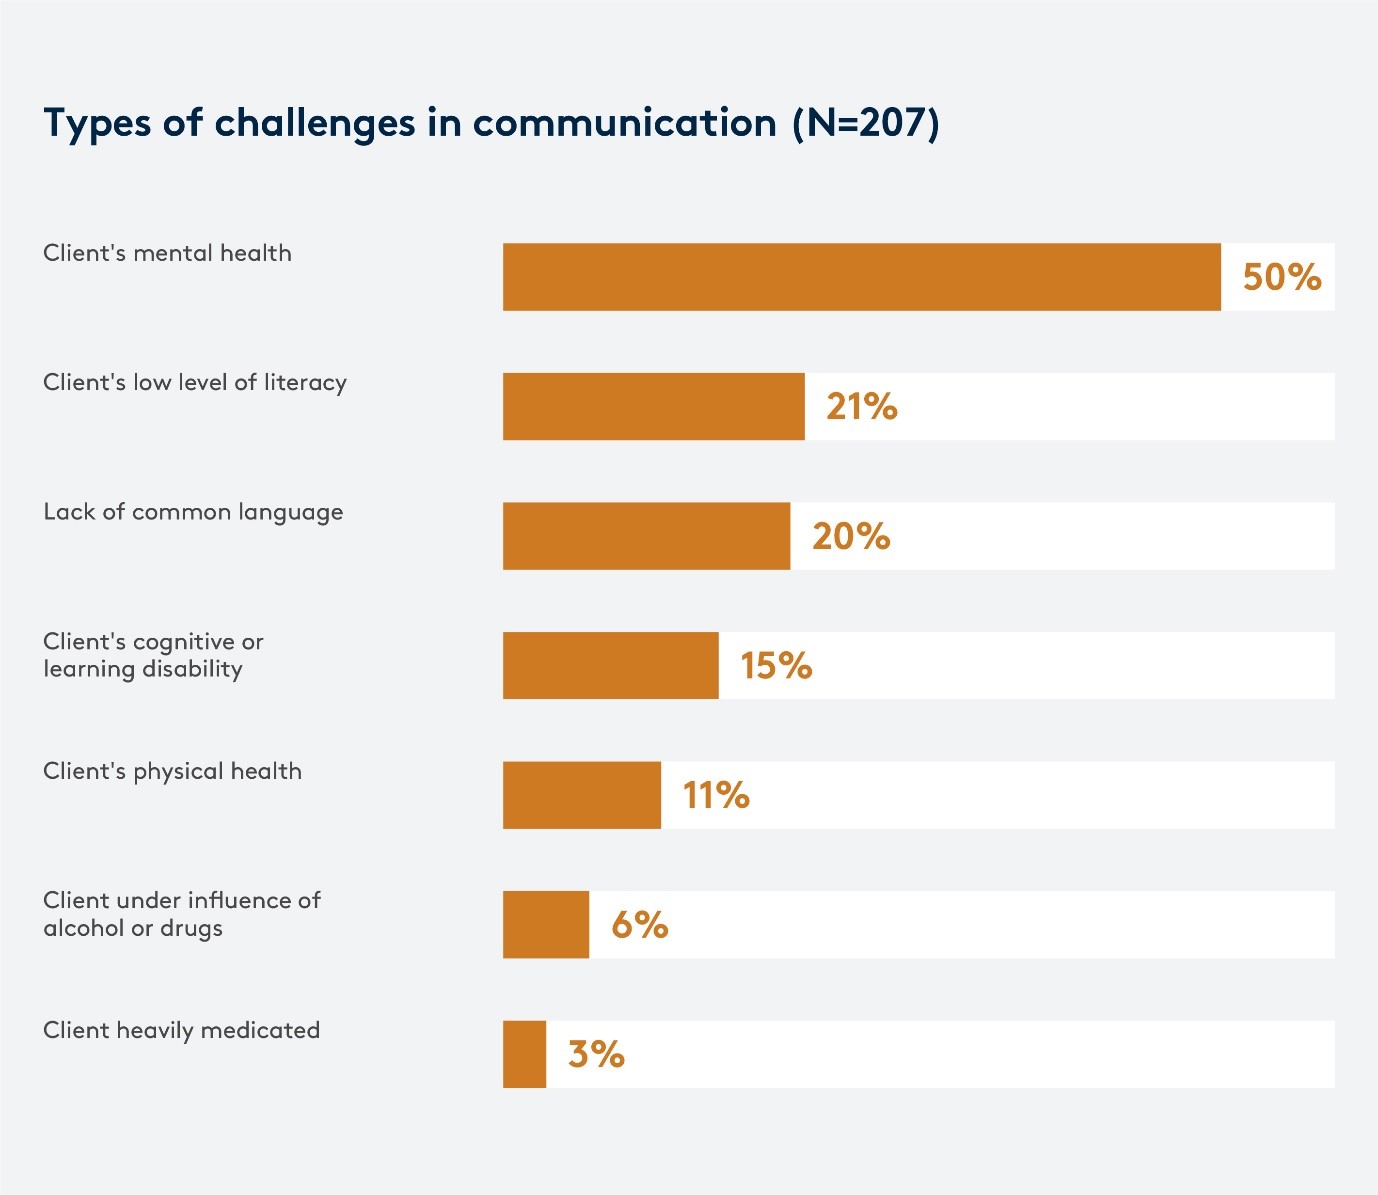 Types of challenges in communications